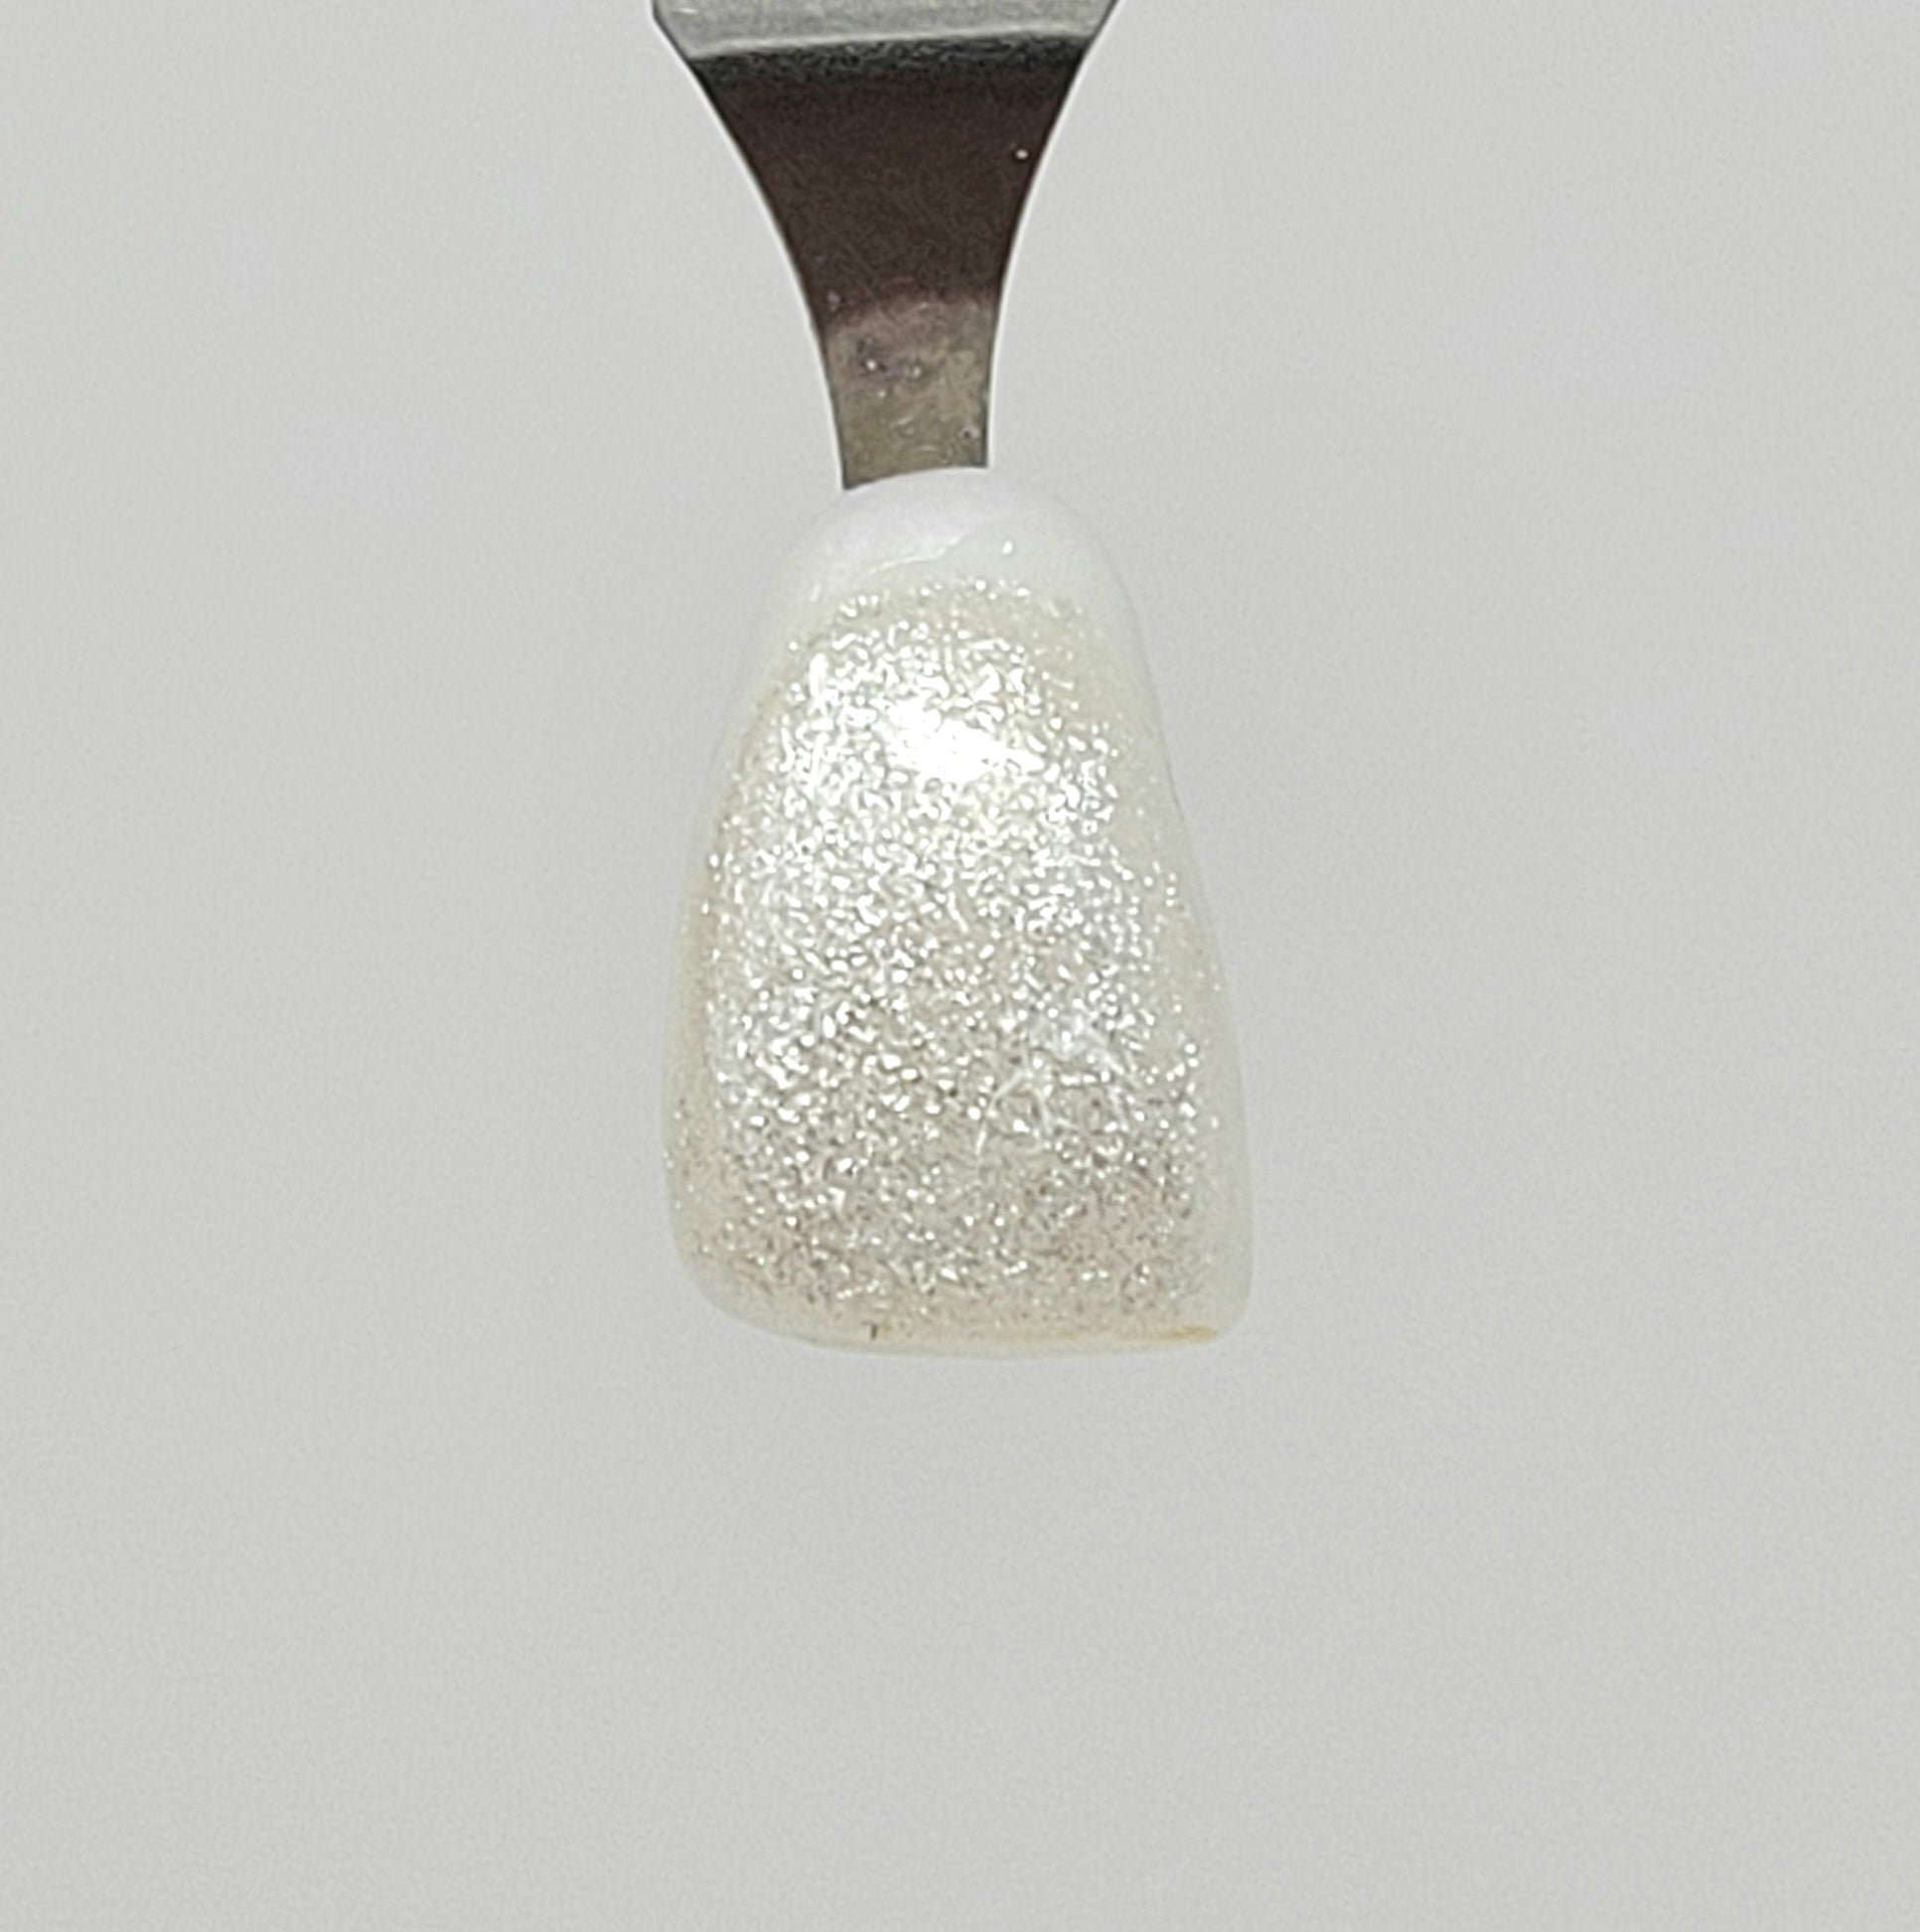 Fine White Sparkle Temporary Tattooth Colorant on a demo tooth.  These colorants can be applied to teeth to temporarily alter their color or iridescence.